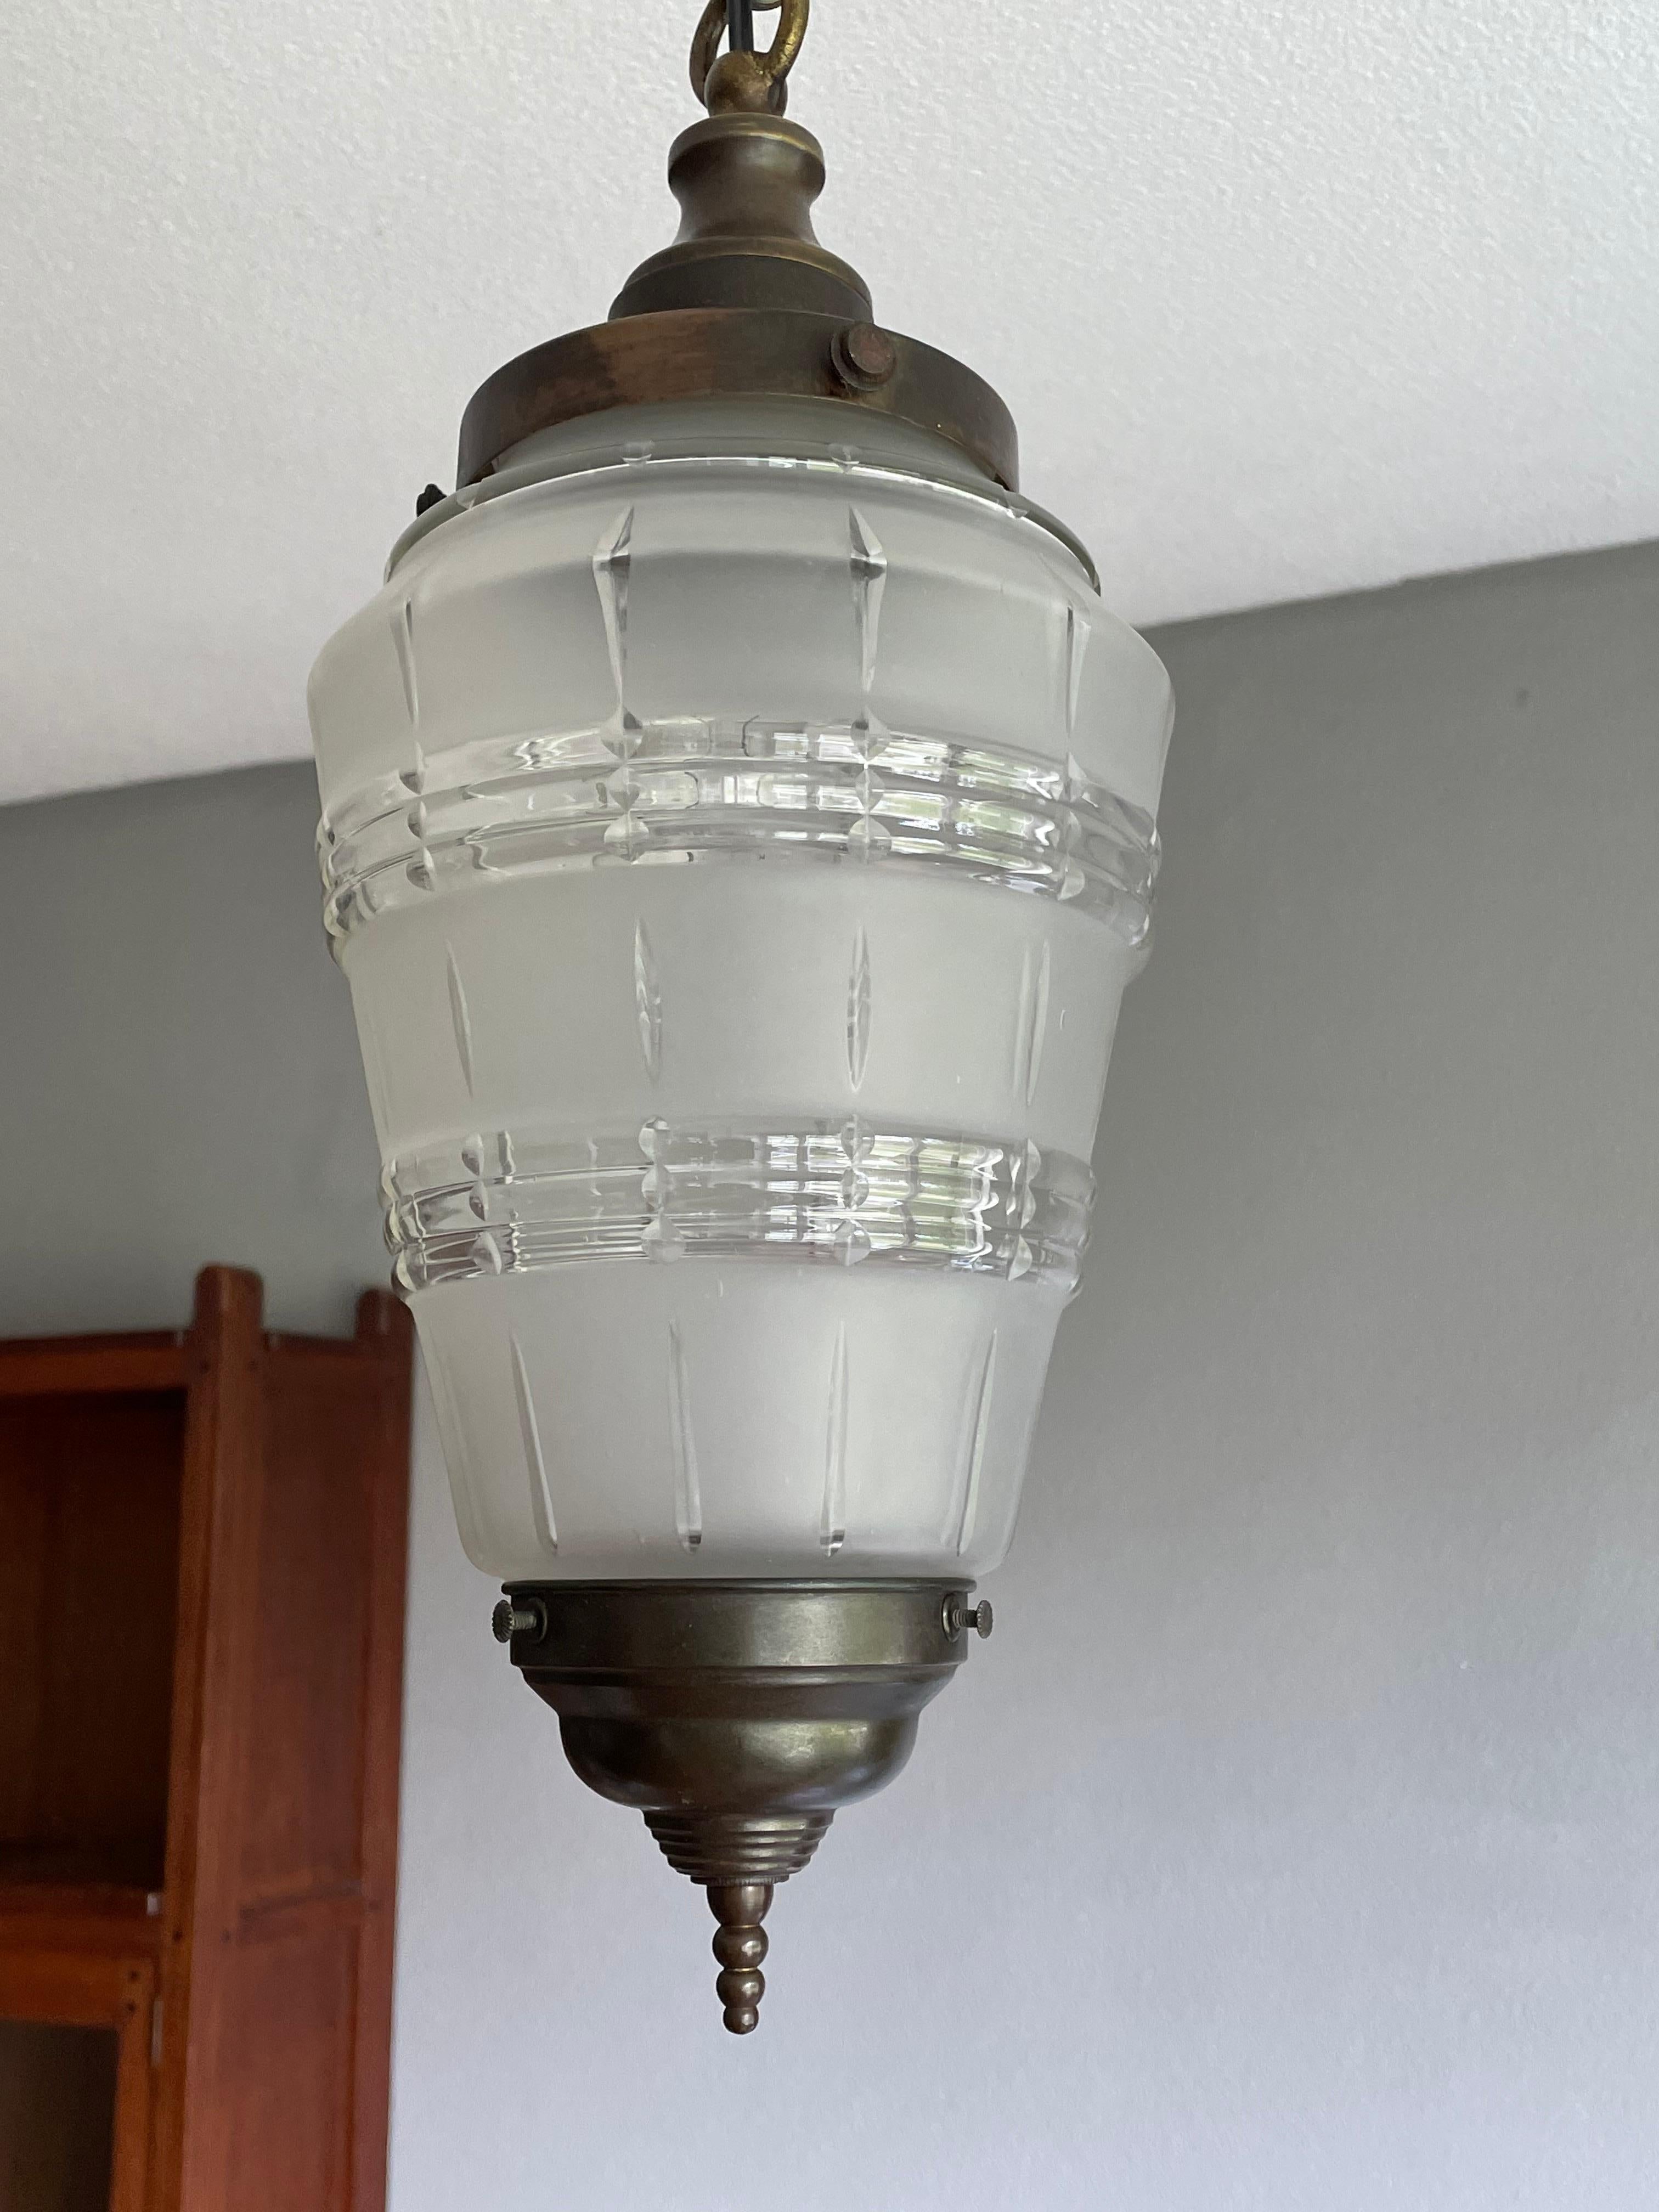 Stunning and stylish Arts and Crafts lantern or ceiling lamp.

This all handcrafted, practical size and great looking ceiling lamp is another one of our recent great finds. With early 20th century lighting as one of our specialities, we are always